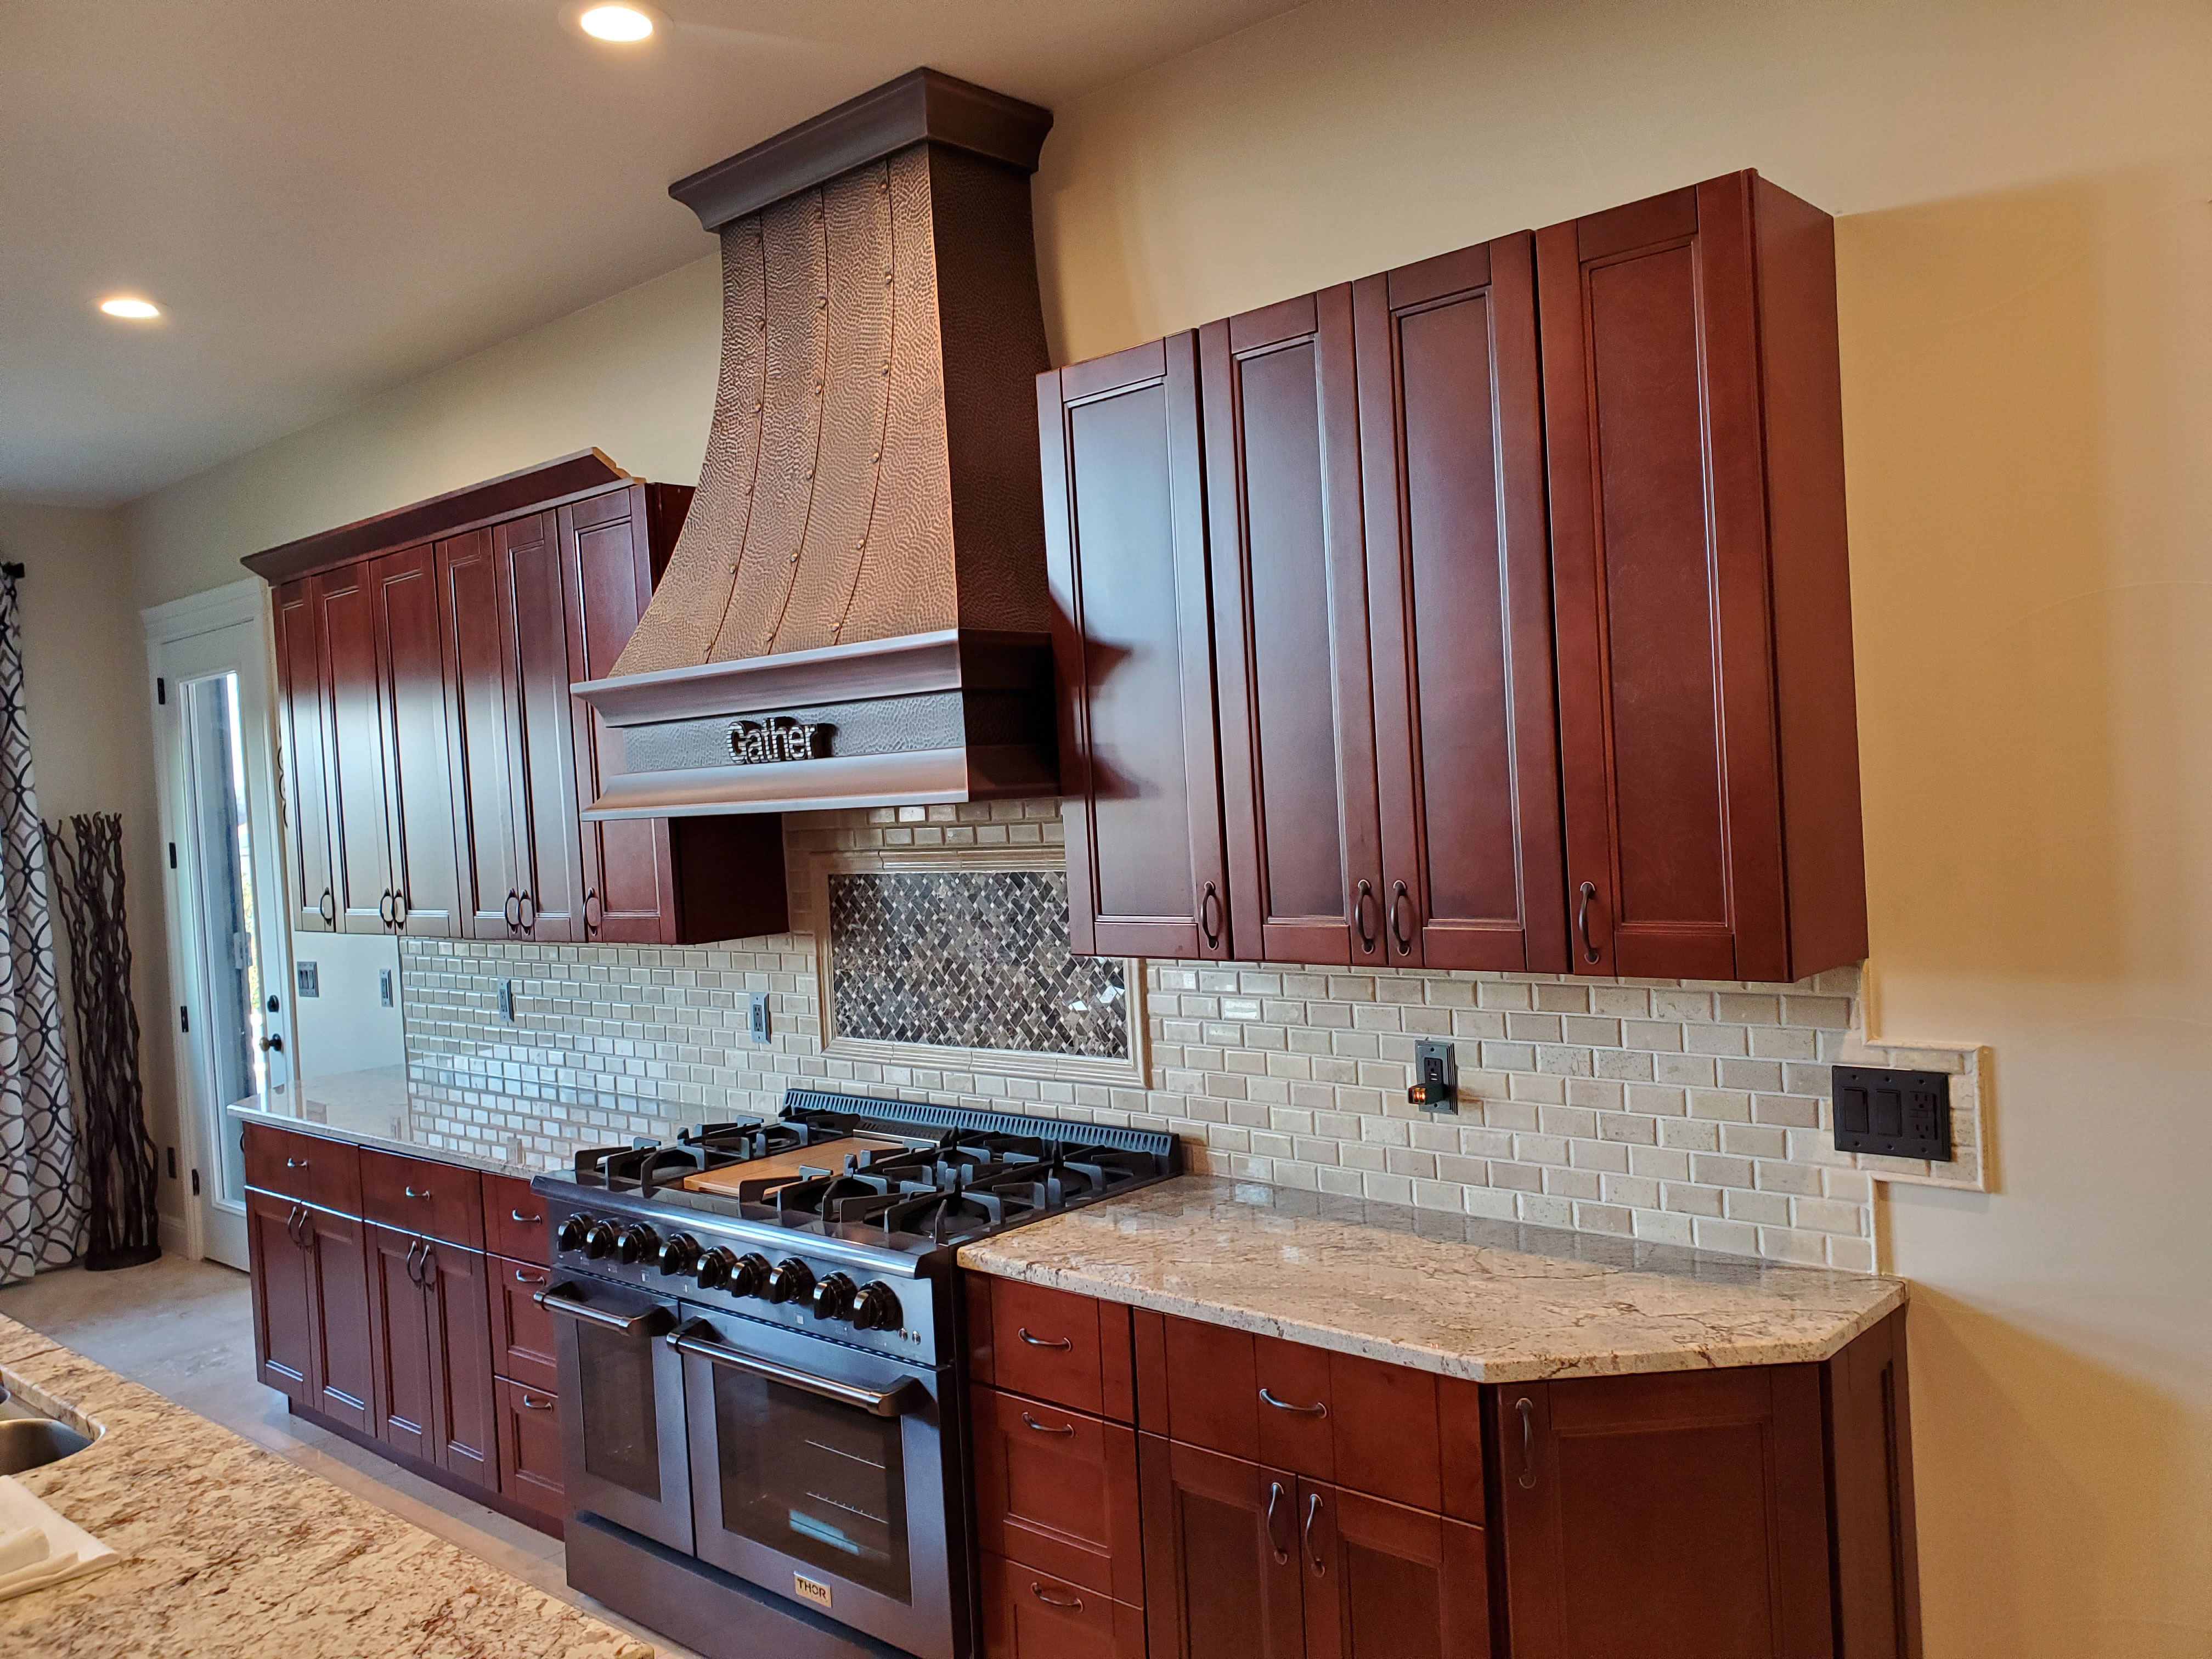 Copper range hood in a Tuscan kitchen with a gas burner range World CopperSmith